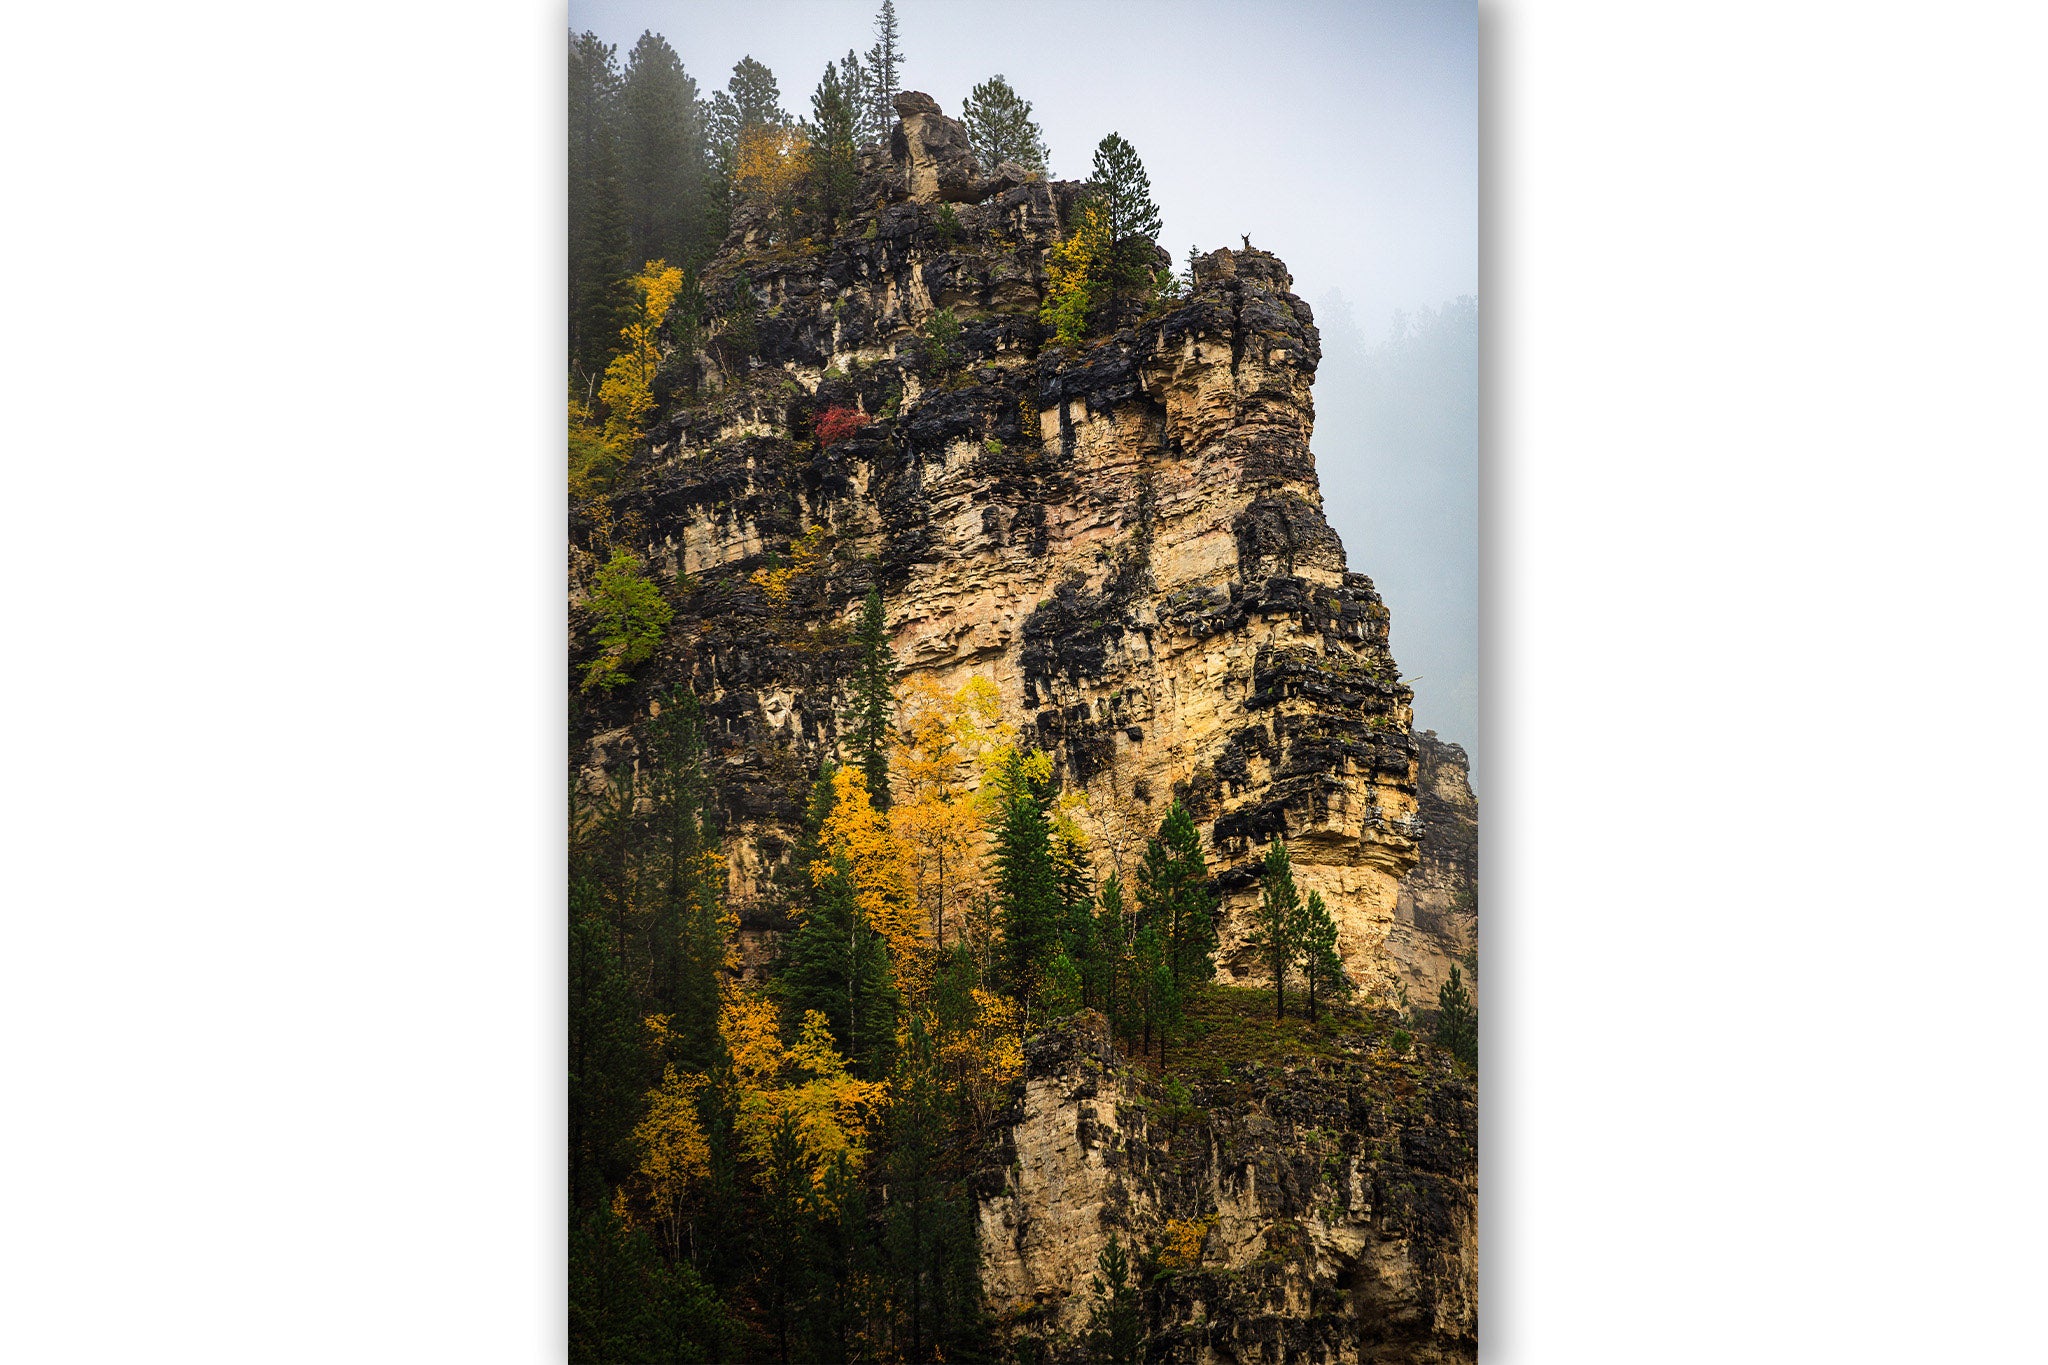 Vertical Black Hills photography print of blackened ledges with fall color on a foggy autumn day in Spearfish Canyon, South Dakota by Sean Ramsey of Southern Plains Photography.